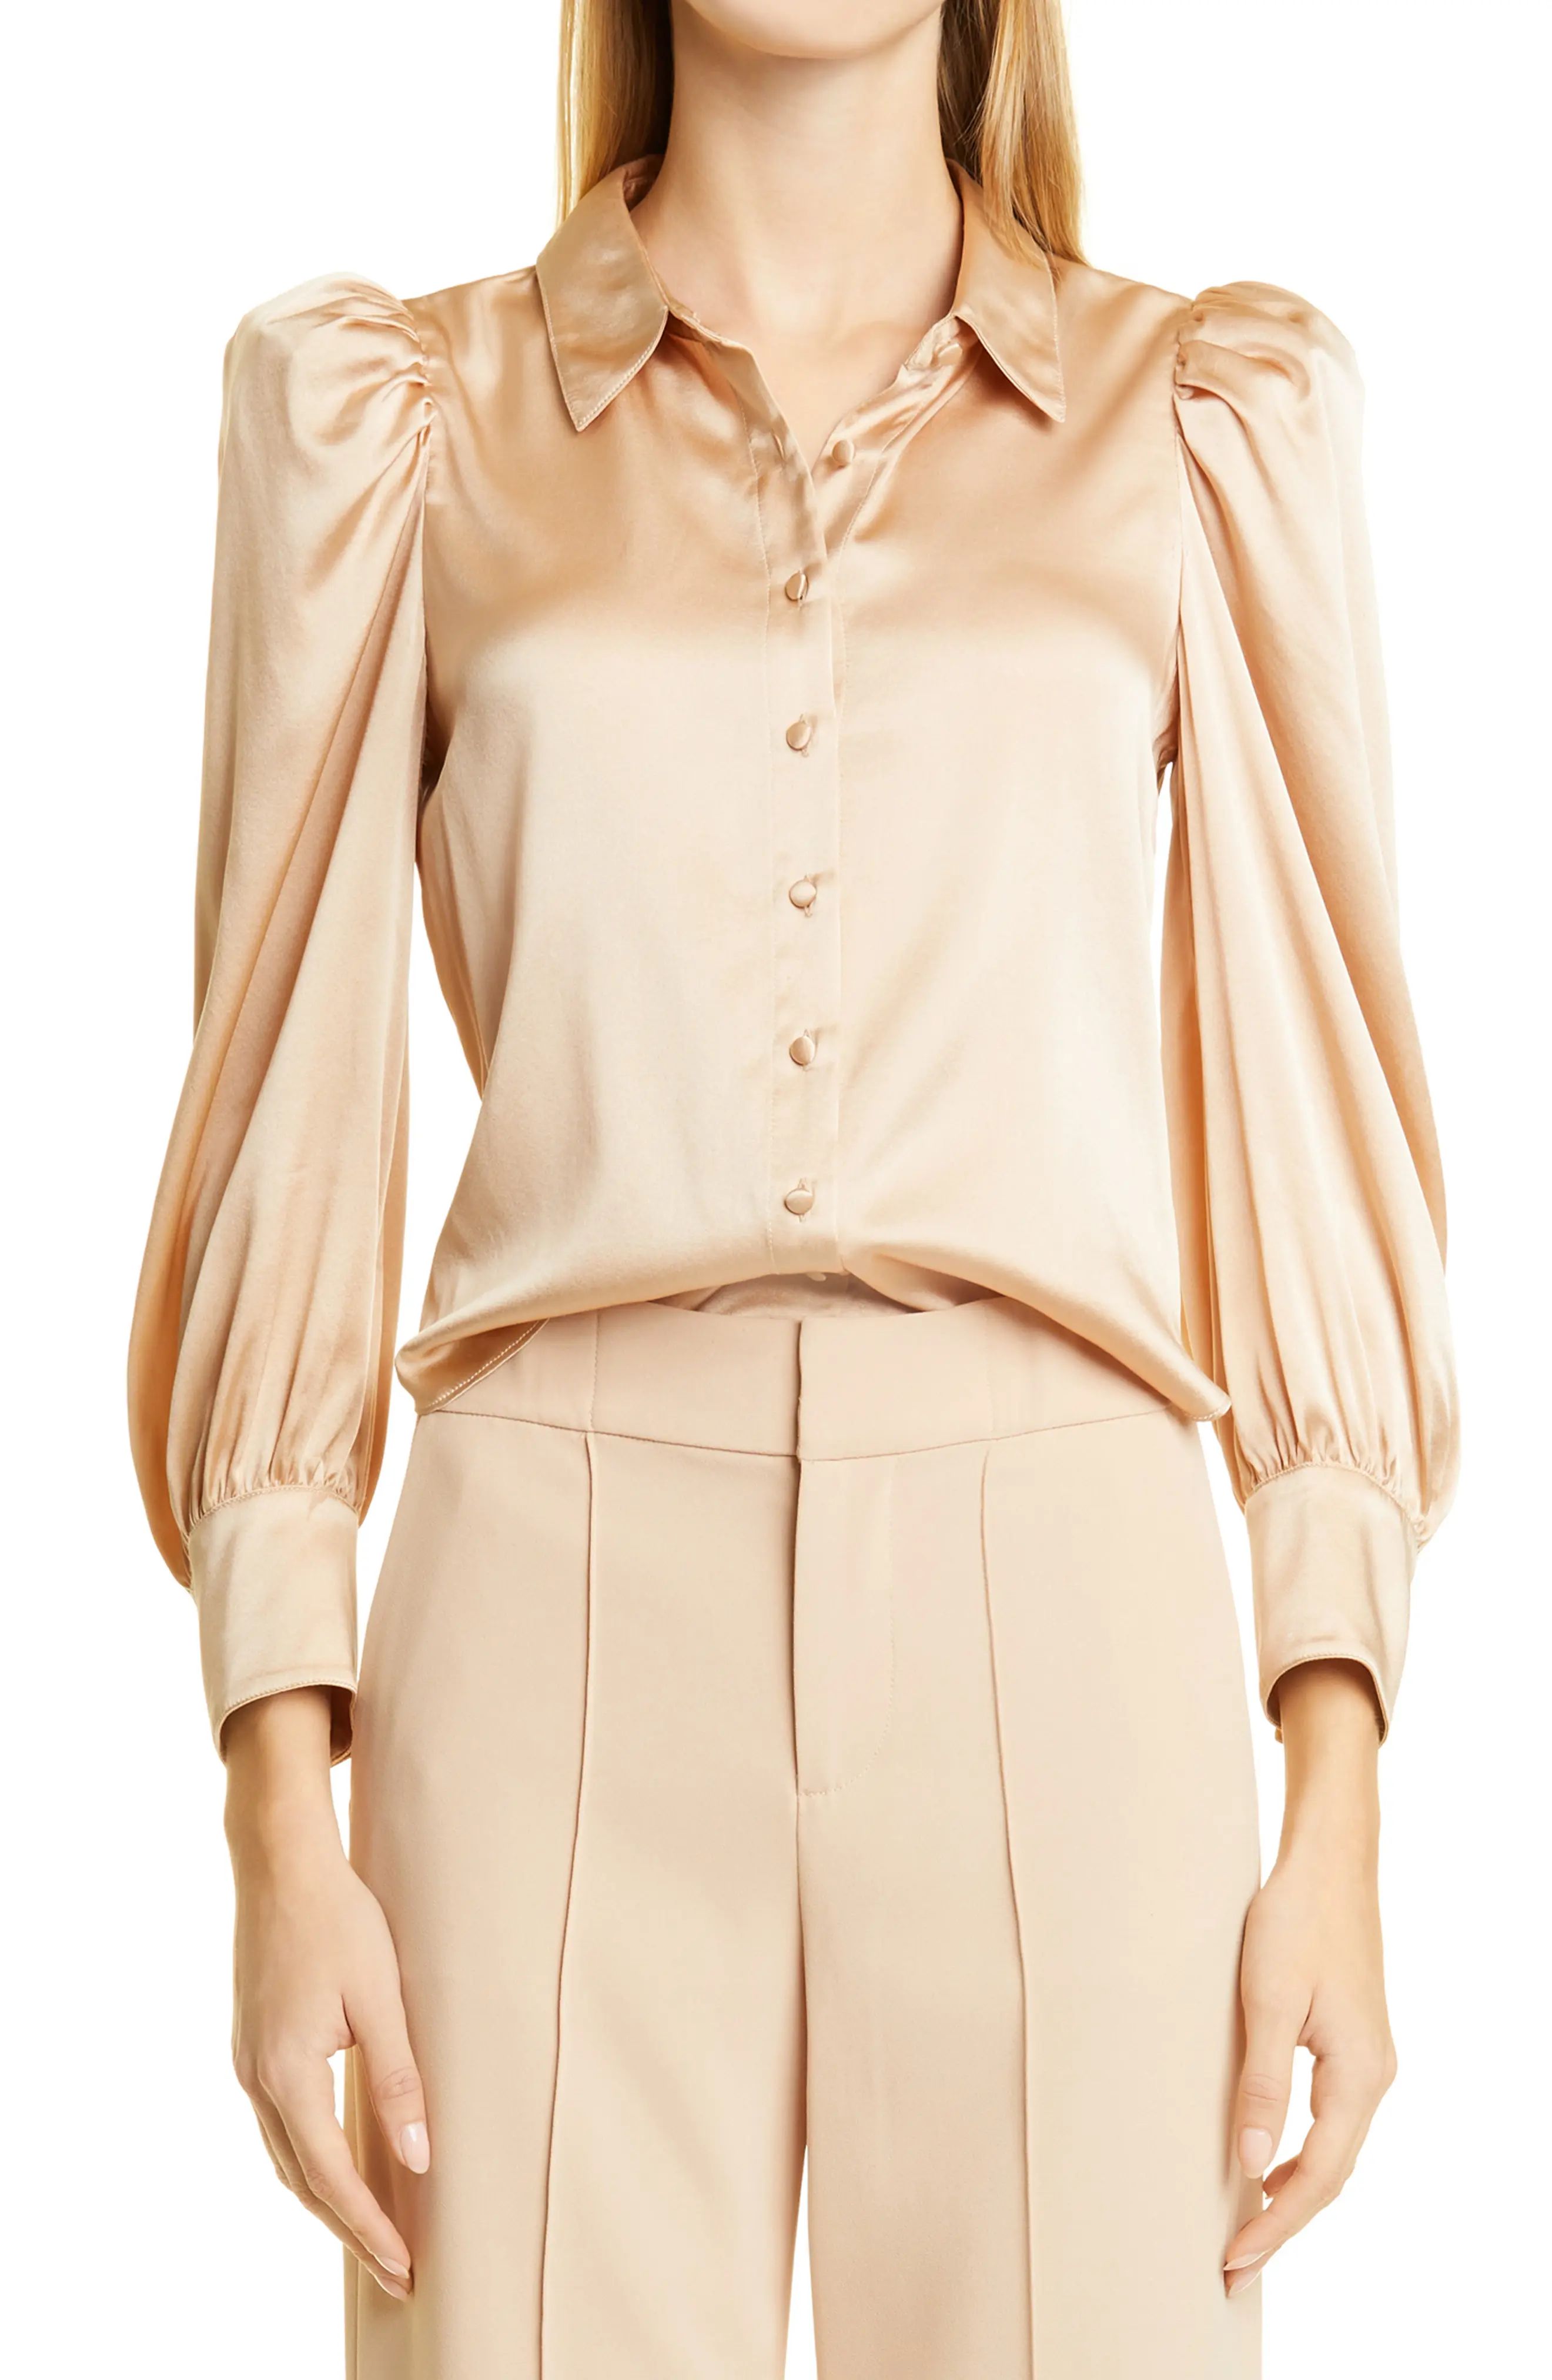 Alice + Olivia Nadine Puff Sleeve Stretch Silk Blouse in Almond at Nordstrom, Size X-Large | Nordstrom